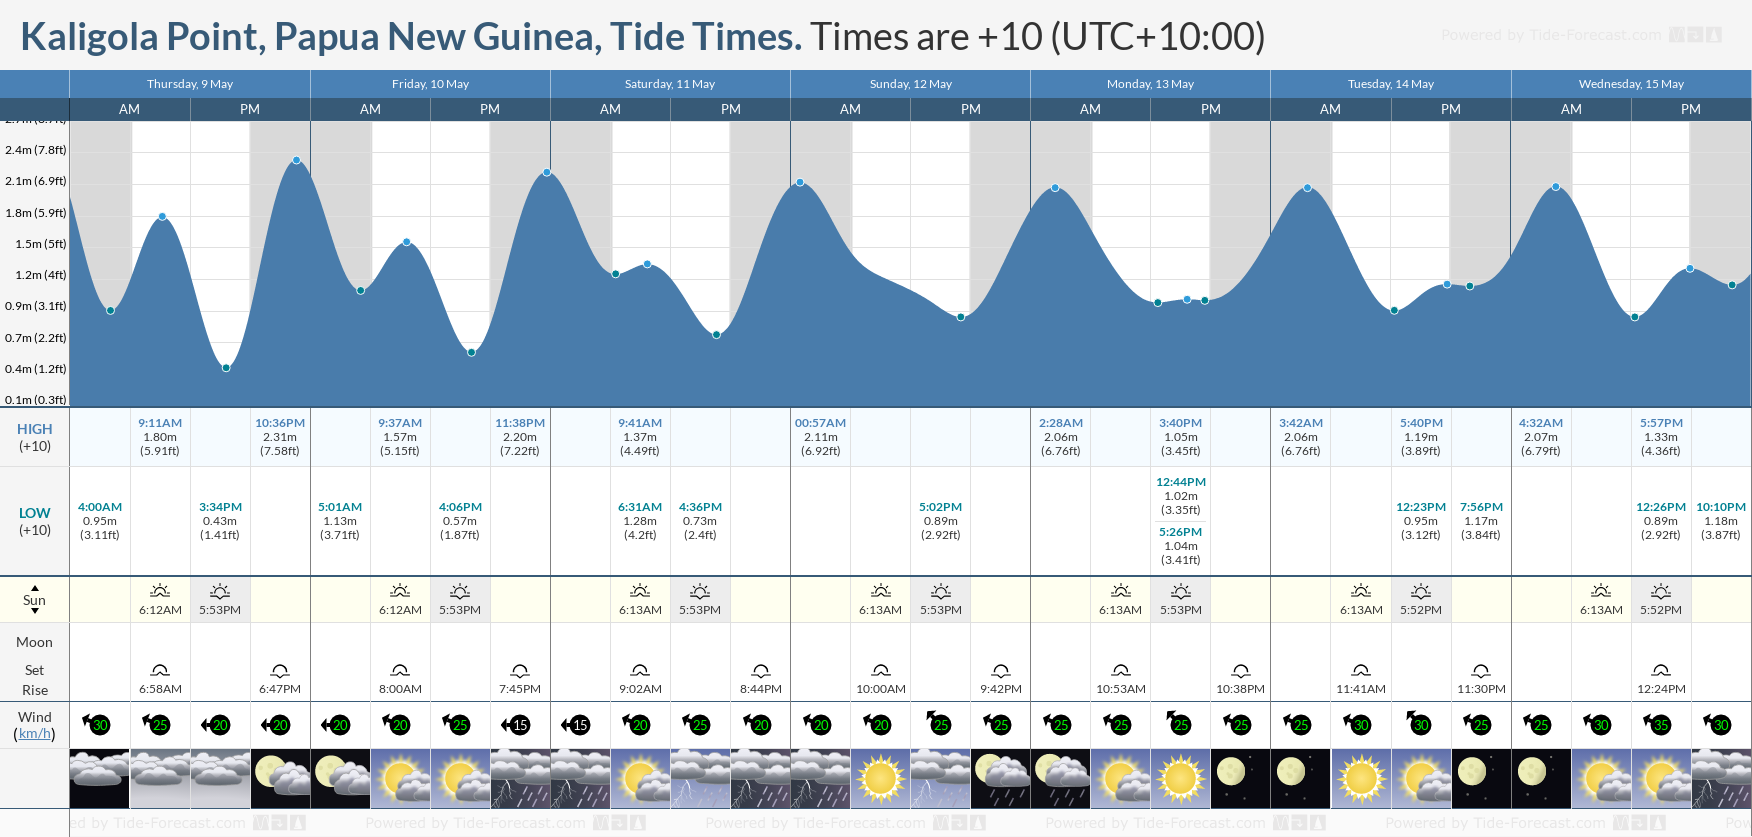 Kaligola Point, Papua New Guinea Tide Chart including high and low tide times for the next 7 days